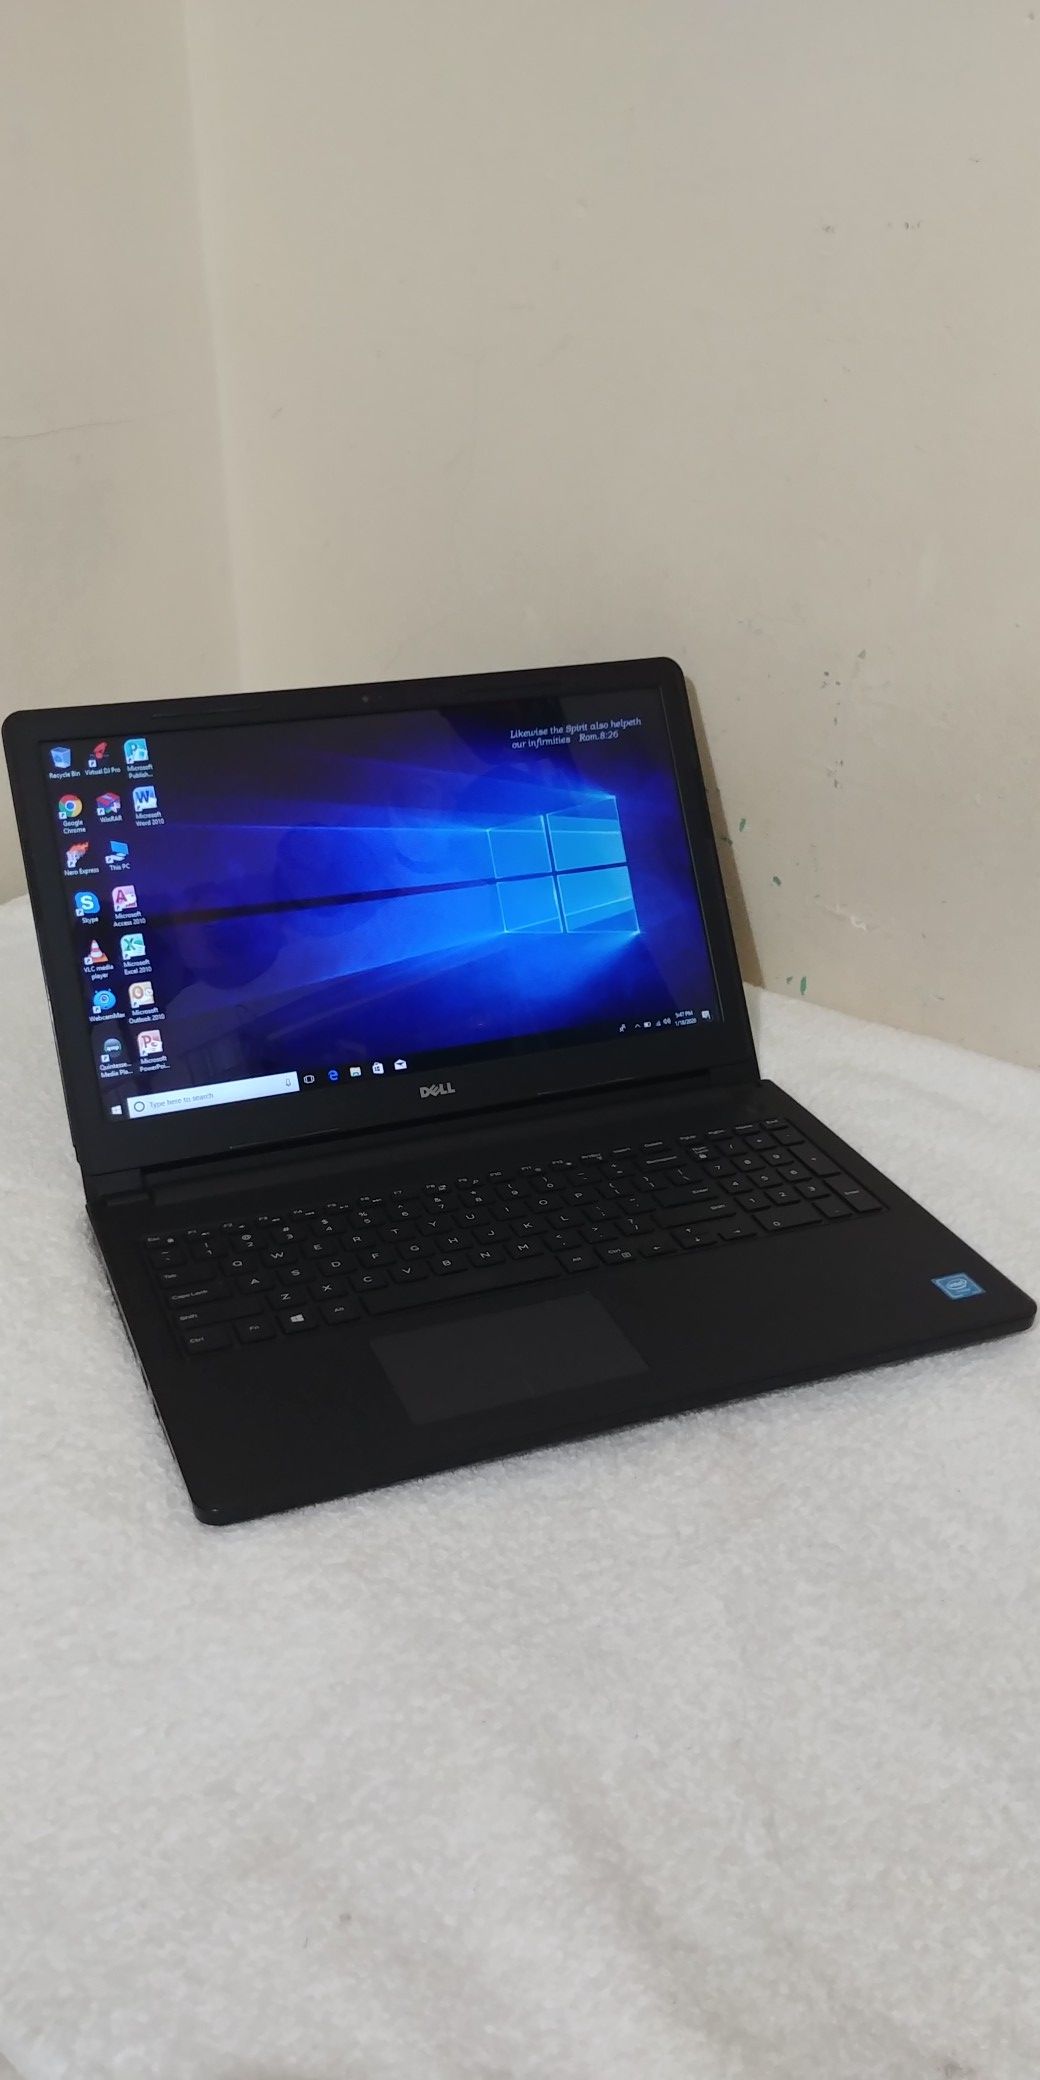 15.6" Dell Laptop, HDMI, Inbuilt Bluetooth, 4GB RAM, 250GB HDD, Webcam. Very Slim, Lightweight And Easy To Carry. Has a Little Dropped As Pictured.